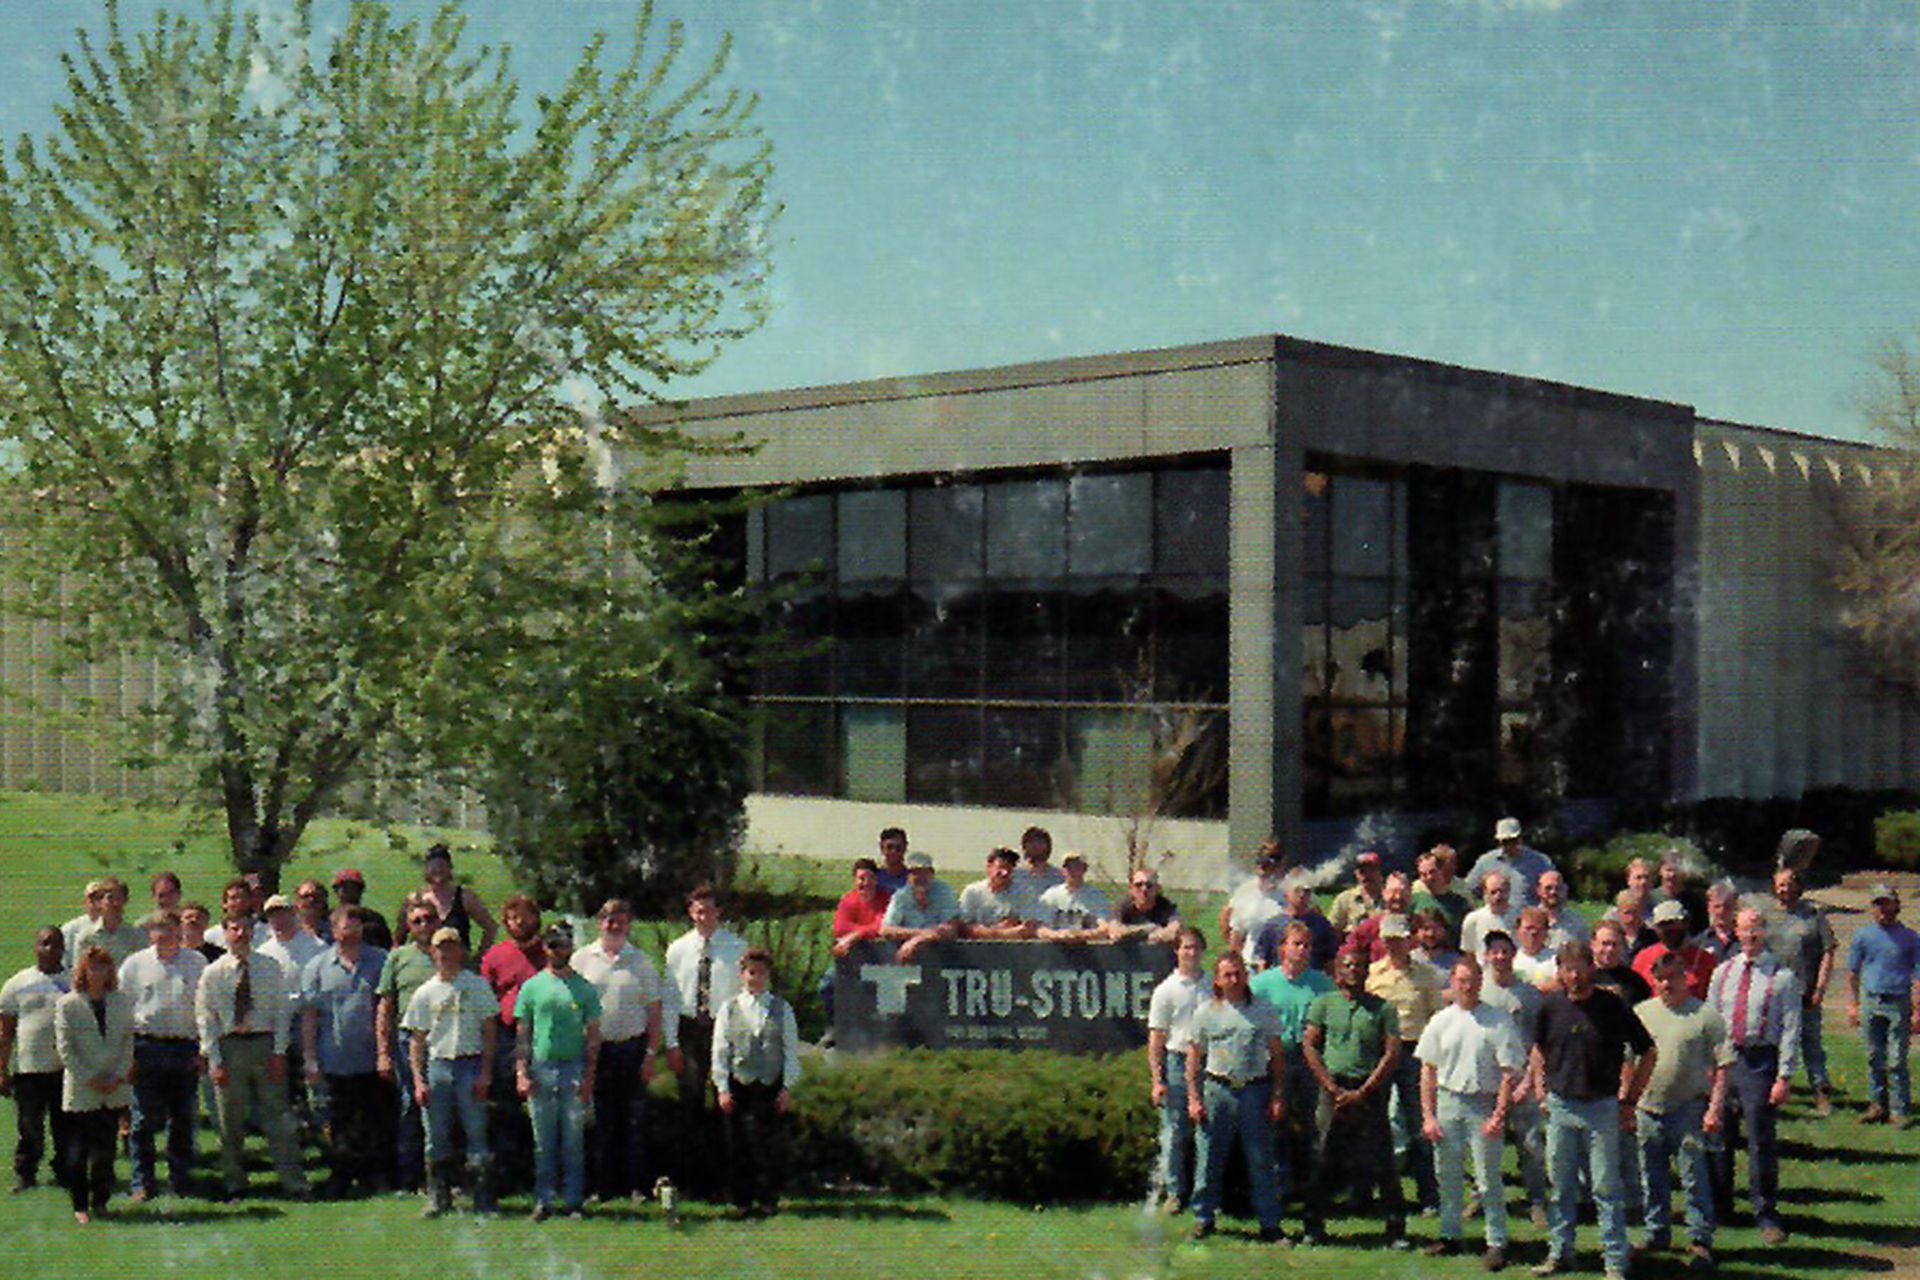 Older photo of workers in front of building